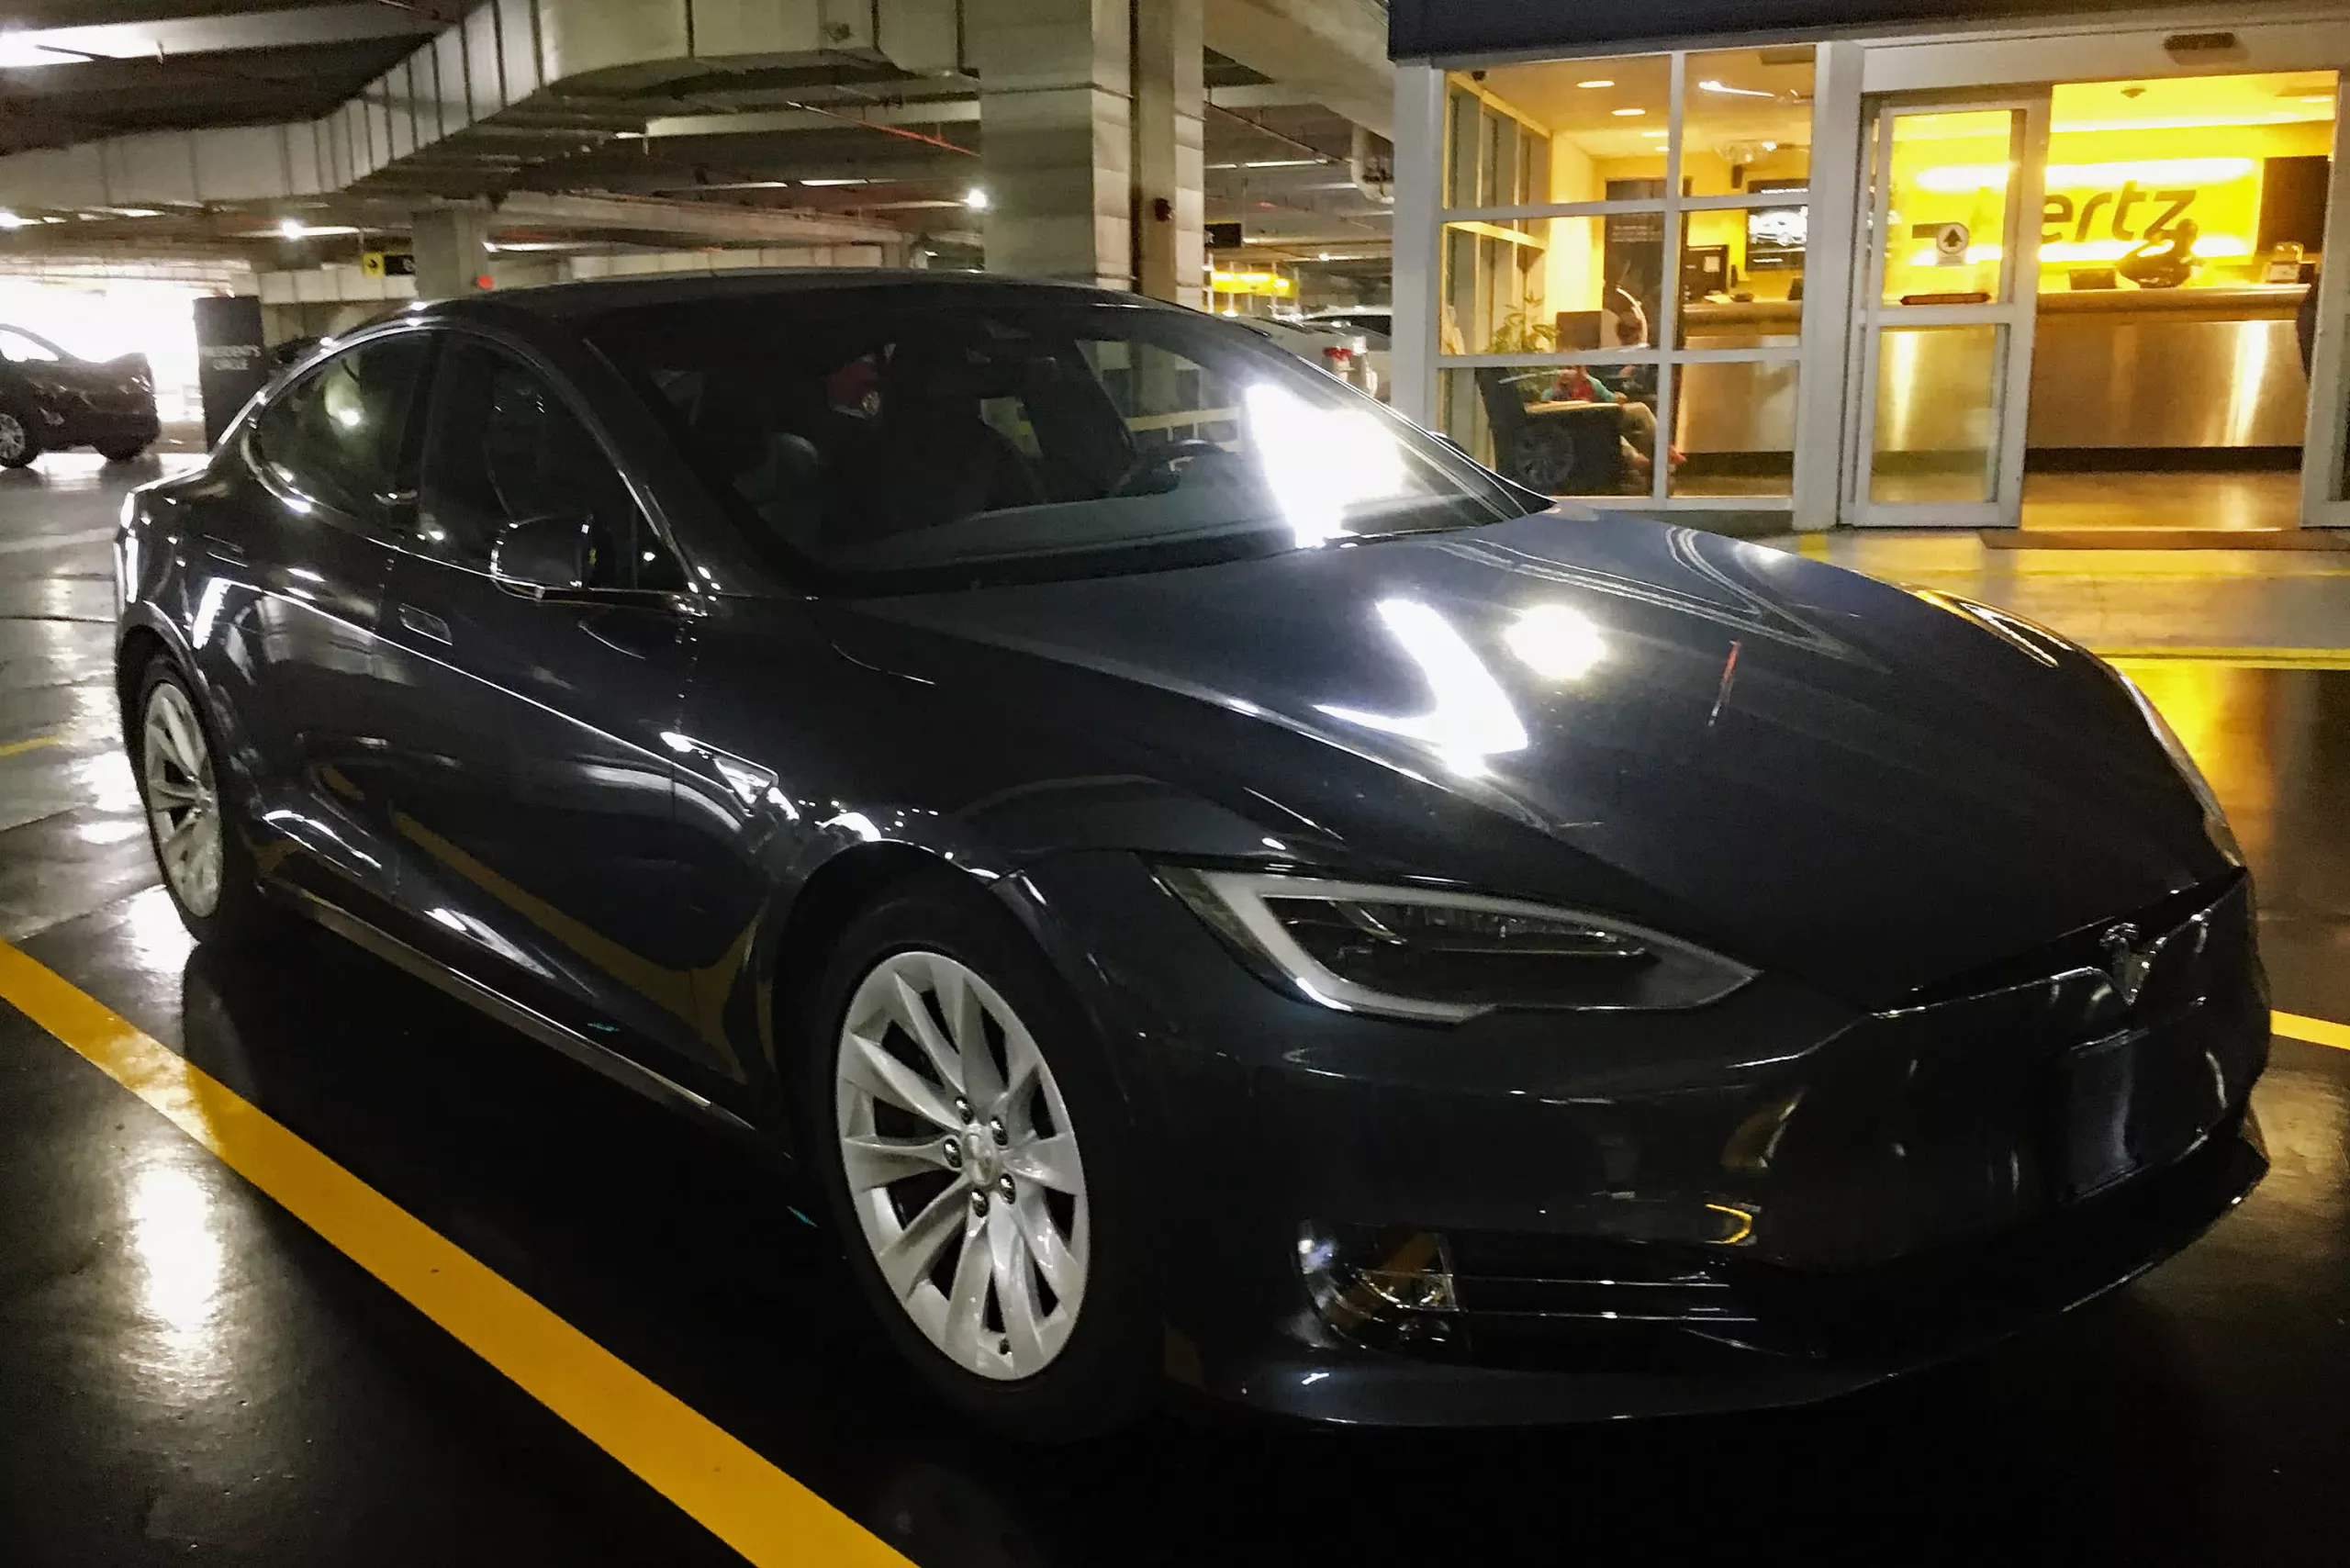 hertz-gets-caught-charging-multiple-tesla-renters-for-not-returning-the-evs-with-a-full-tank-of-gas-[techspot]